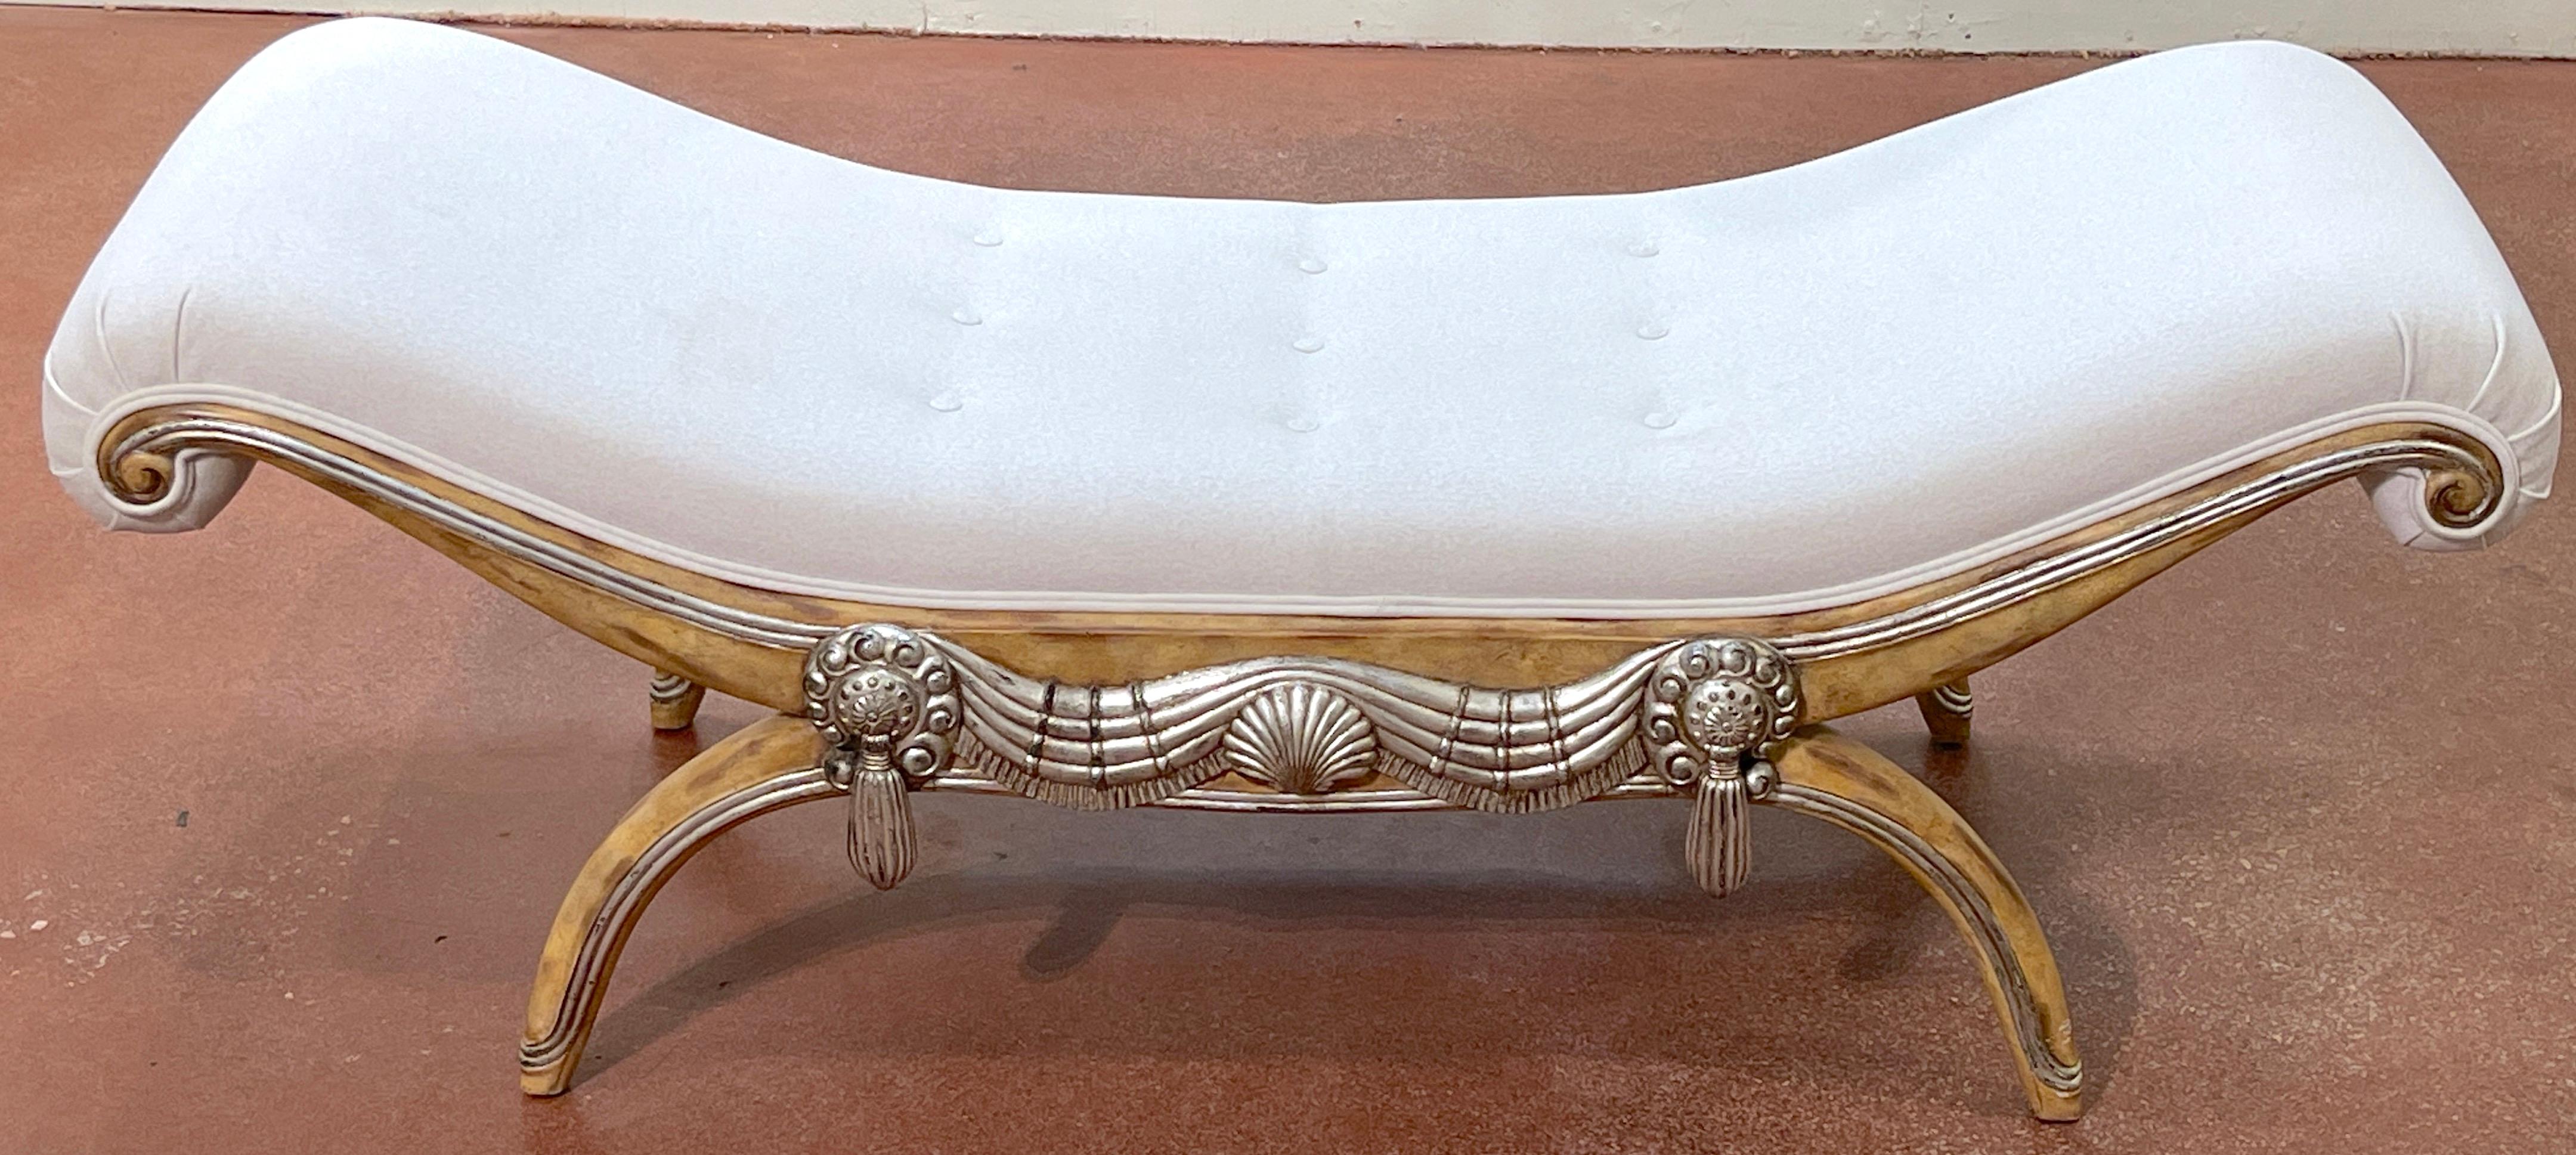 French Modern Bleached & Silverleaf Curule Bench with Cashmere Upholstery  For Sale 3